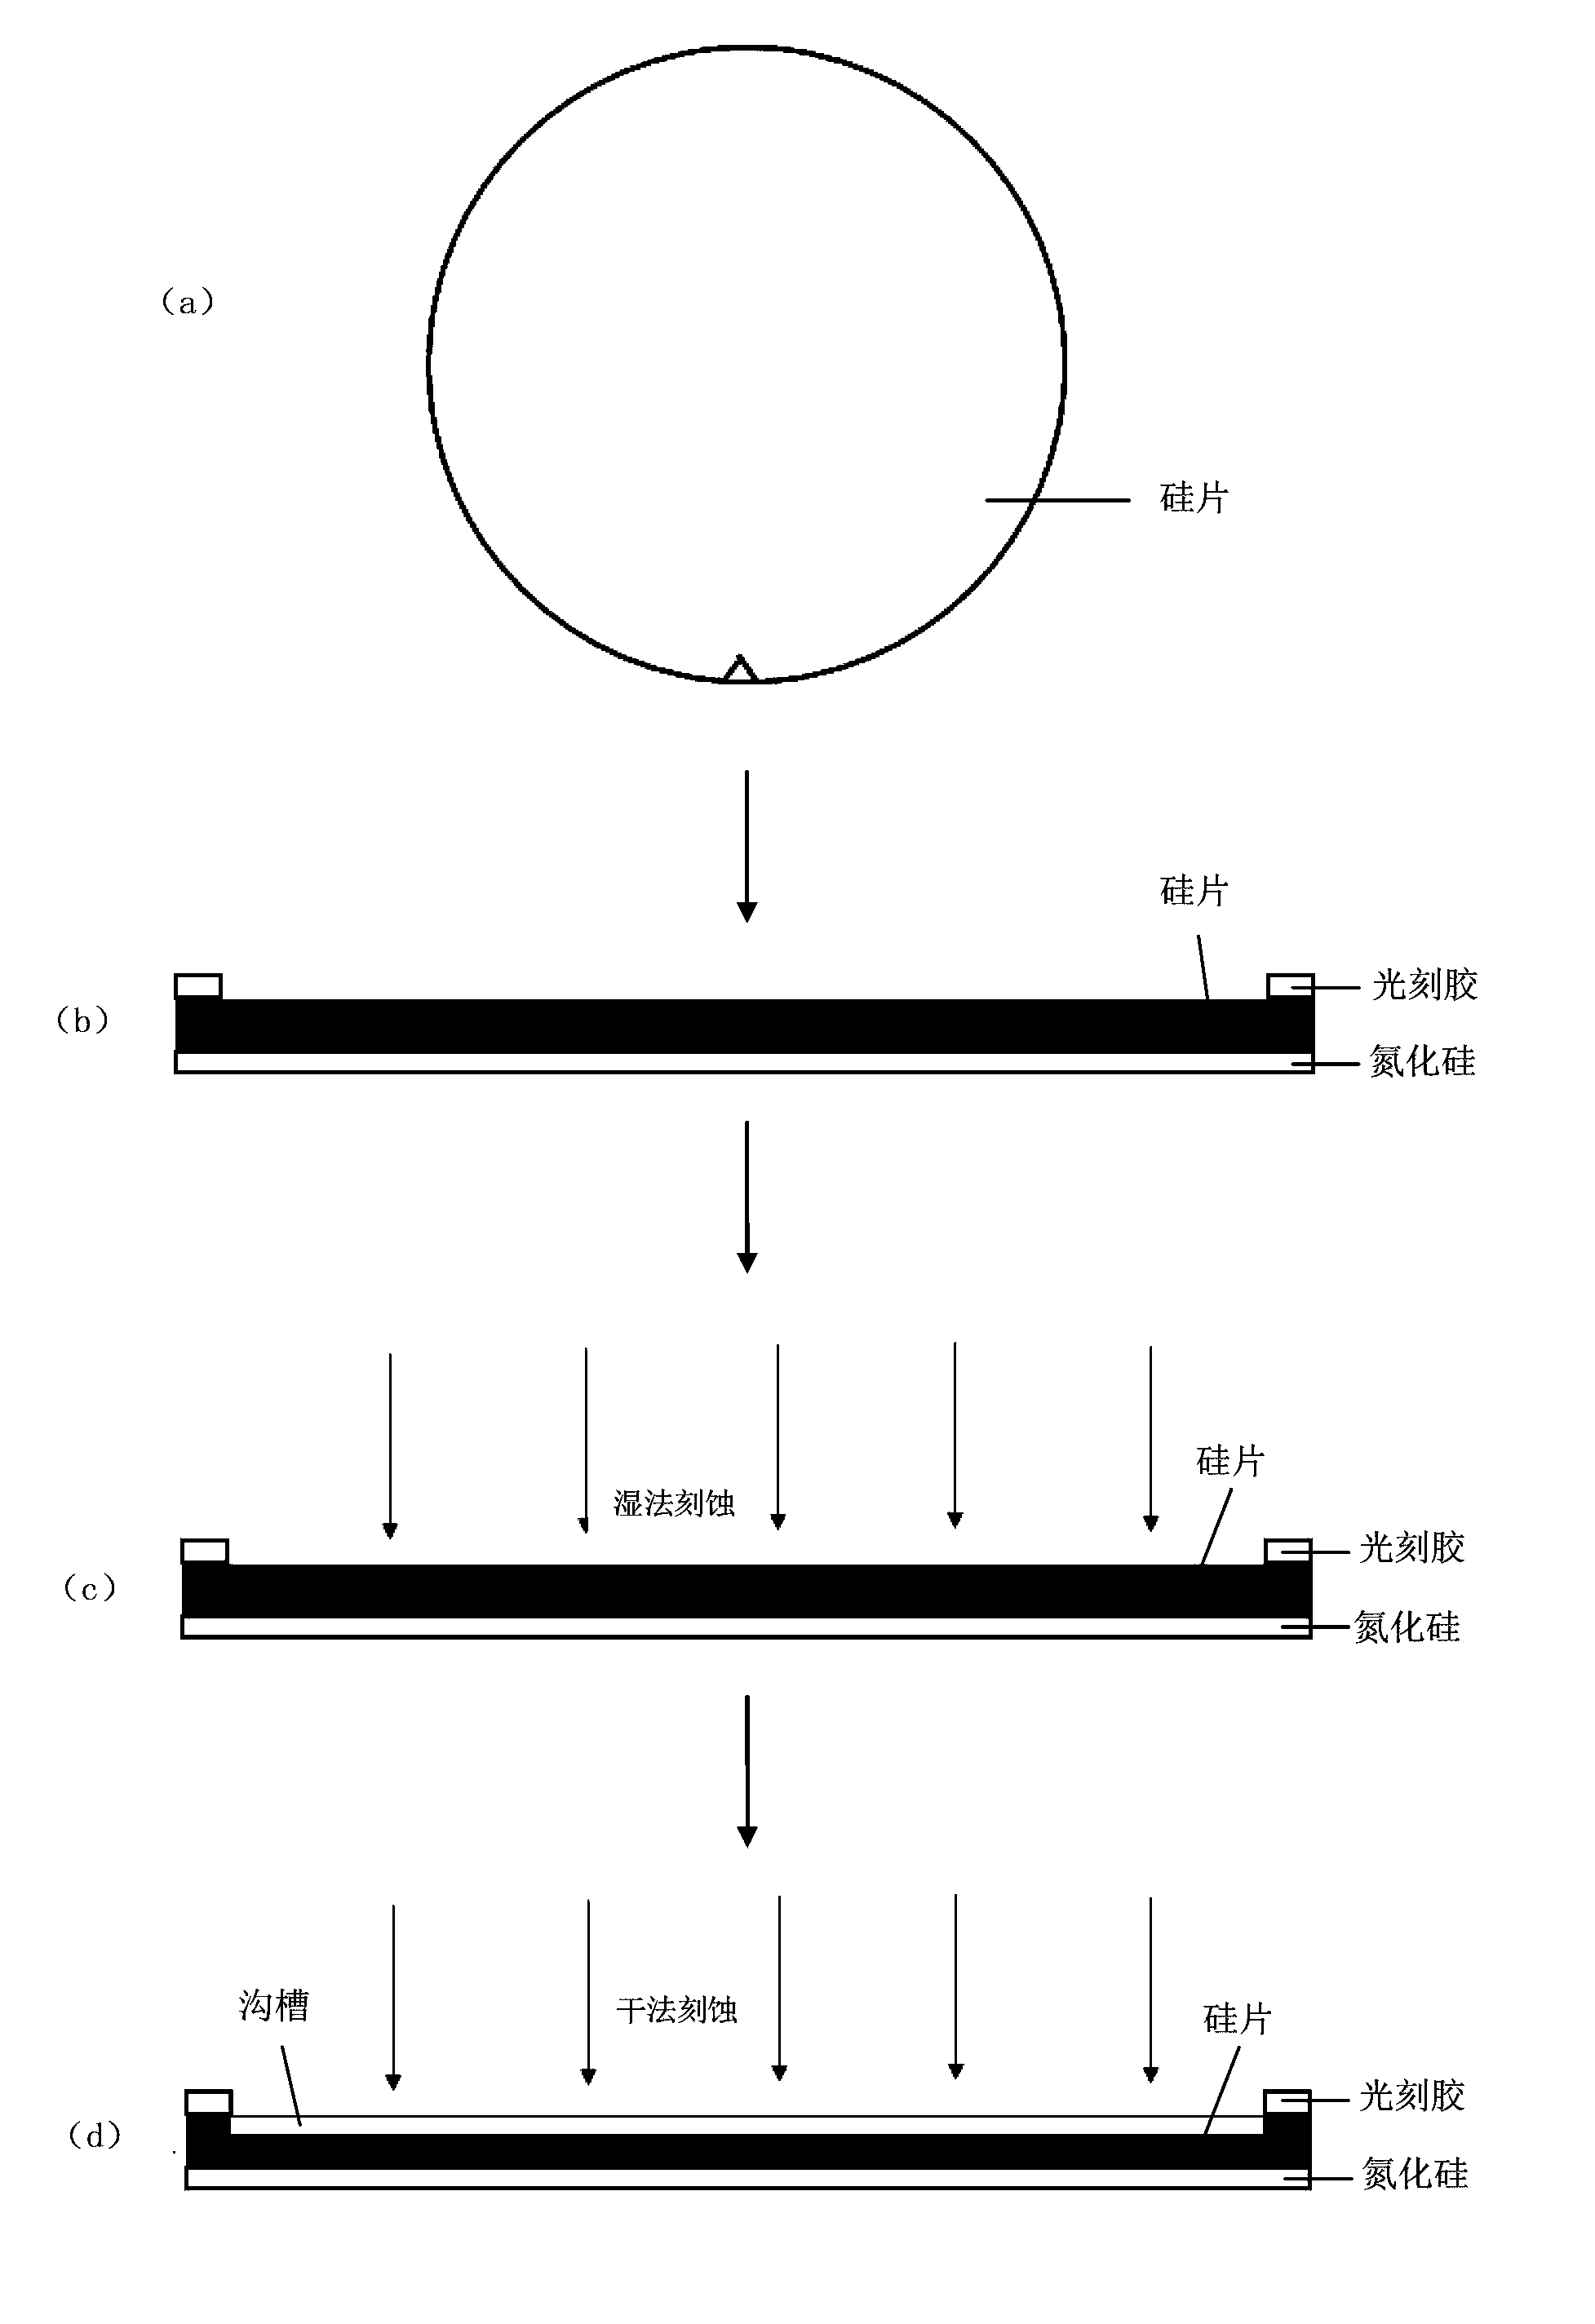 Method for manufacturing thin silicon wafer